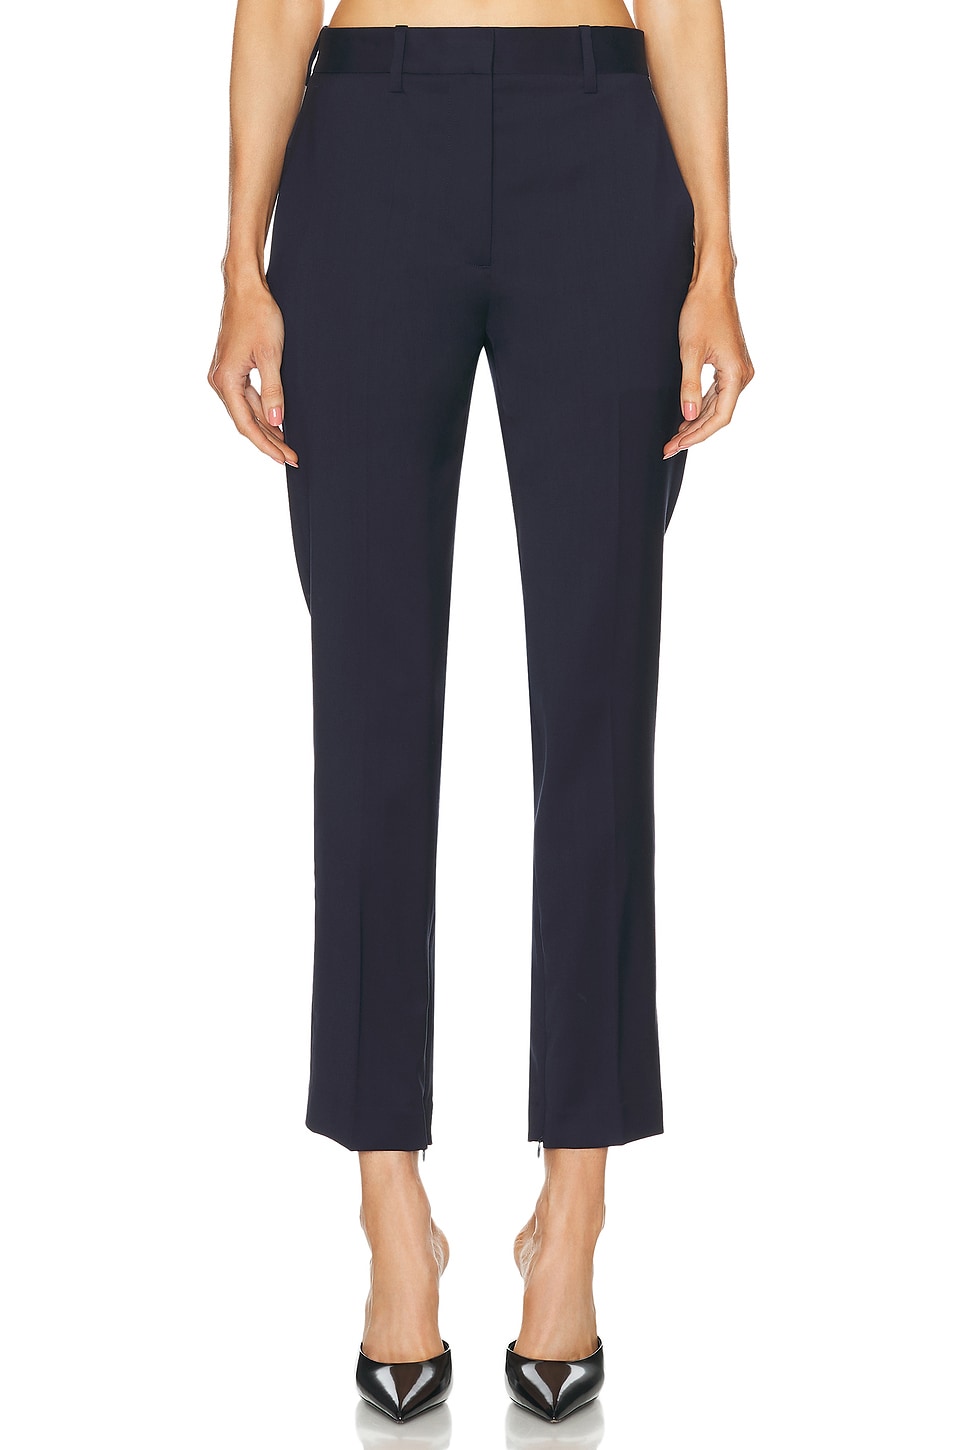 Image 1 of Helmut Lang Crop Tailored Trouser in Navy